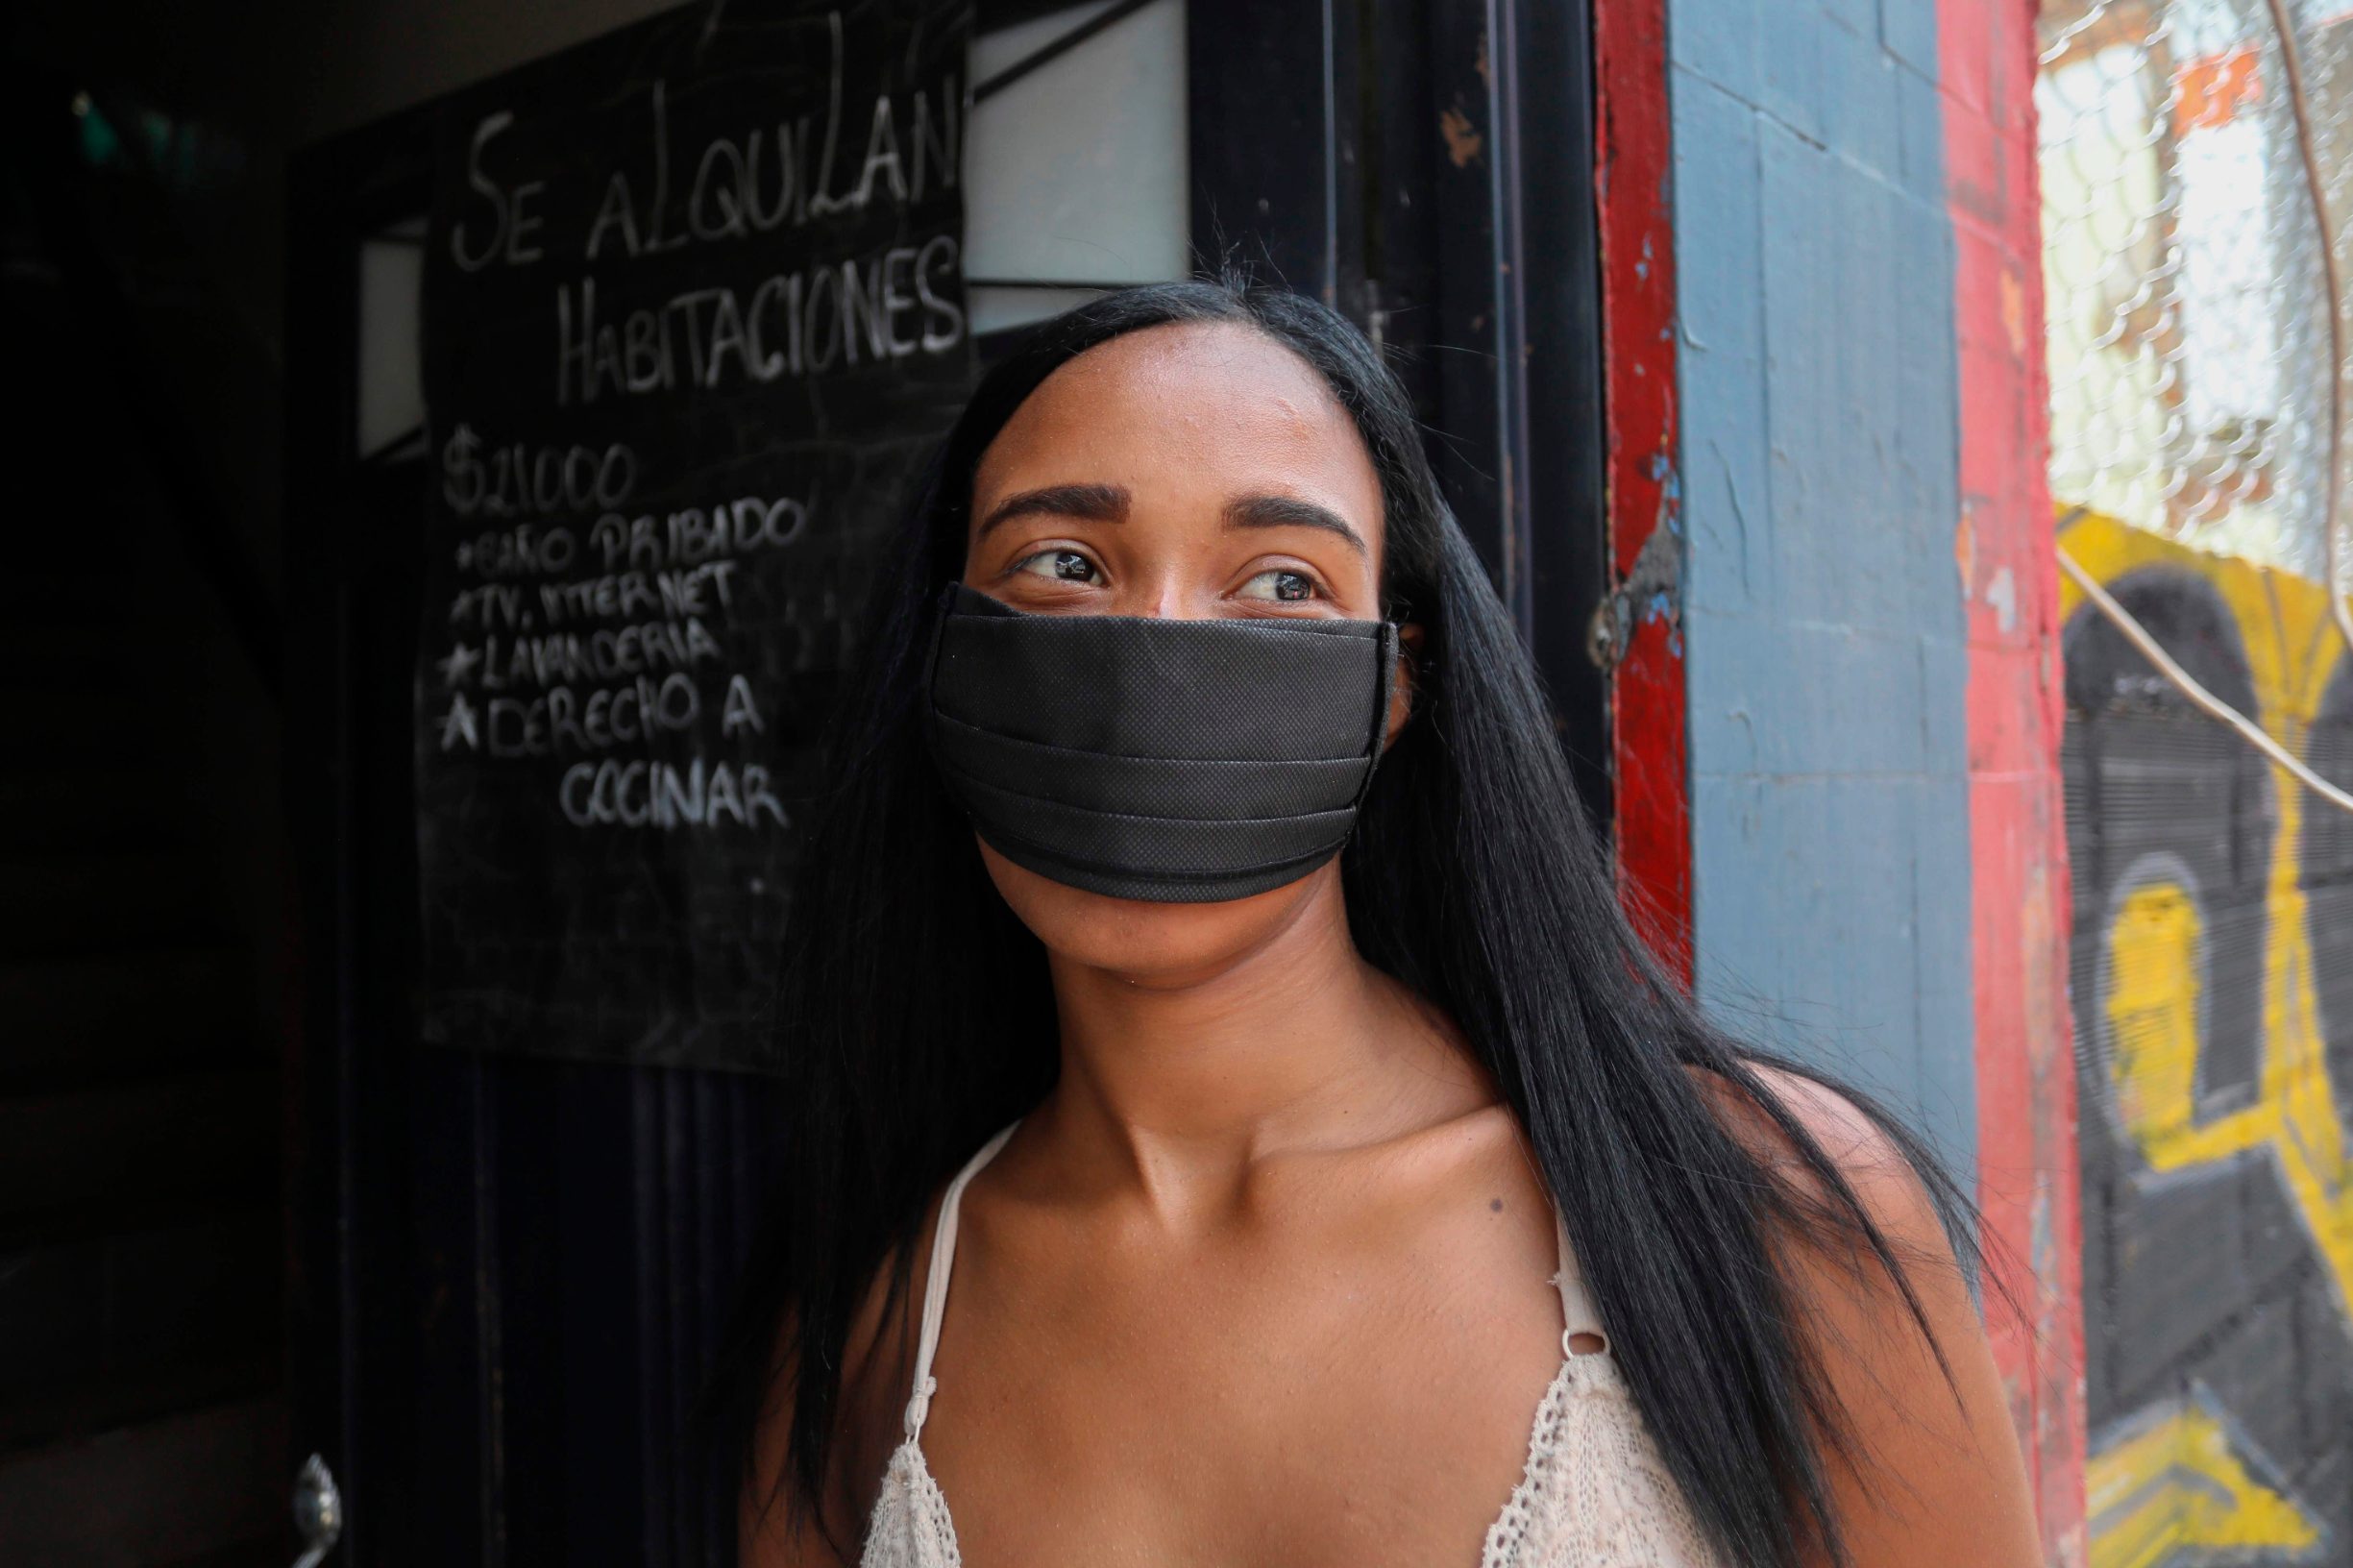 Sex worker Marcela is picture outside a low cost hotel in the Tolerance zone known as the Raudal Sector, where sex workers live and work in Medellin, Colombia, on April 8, 2020. (Photo by Joaquin SARMIENTO / AFP)